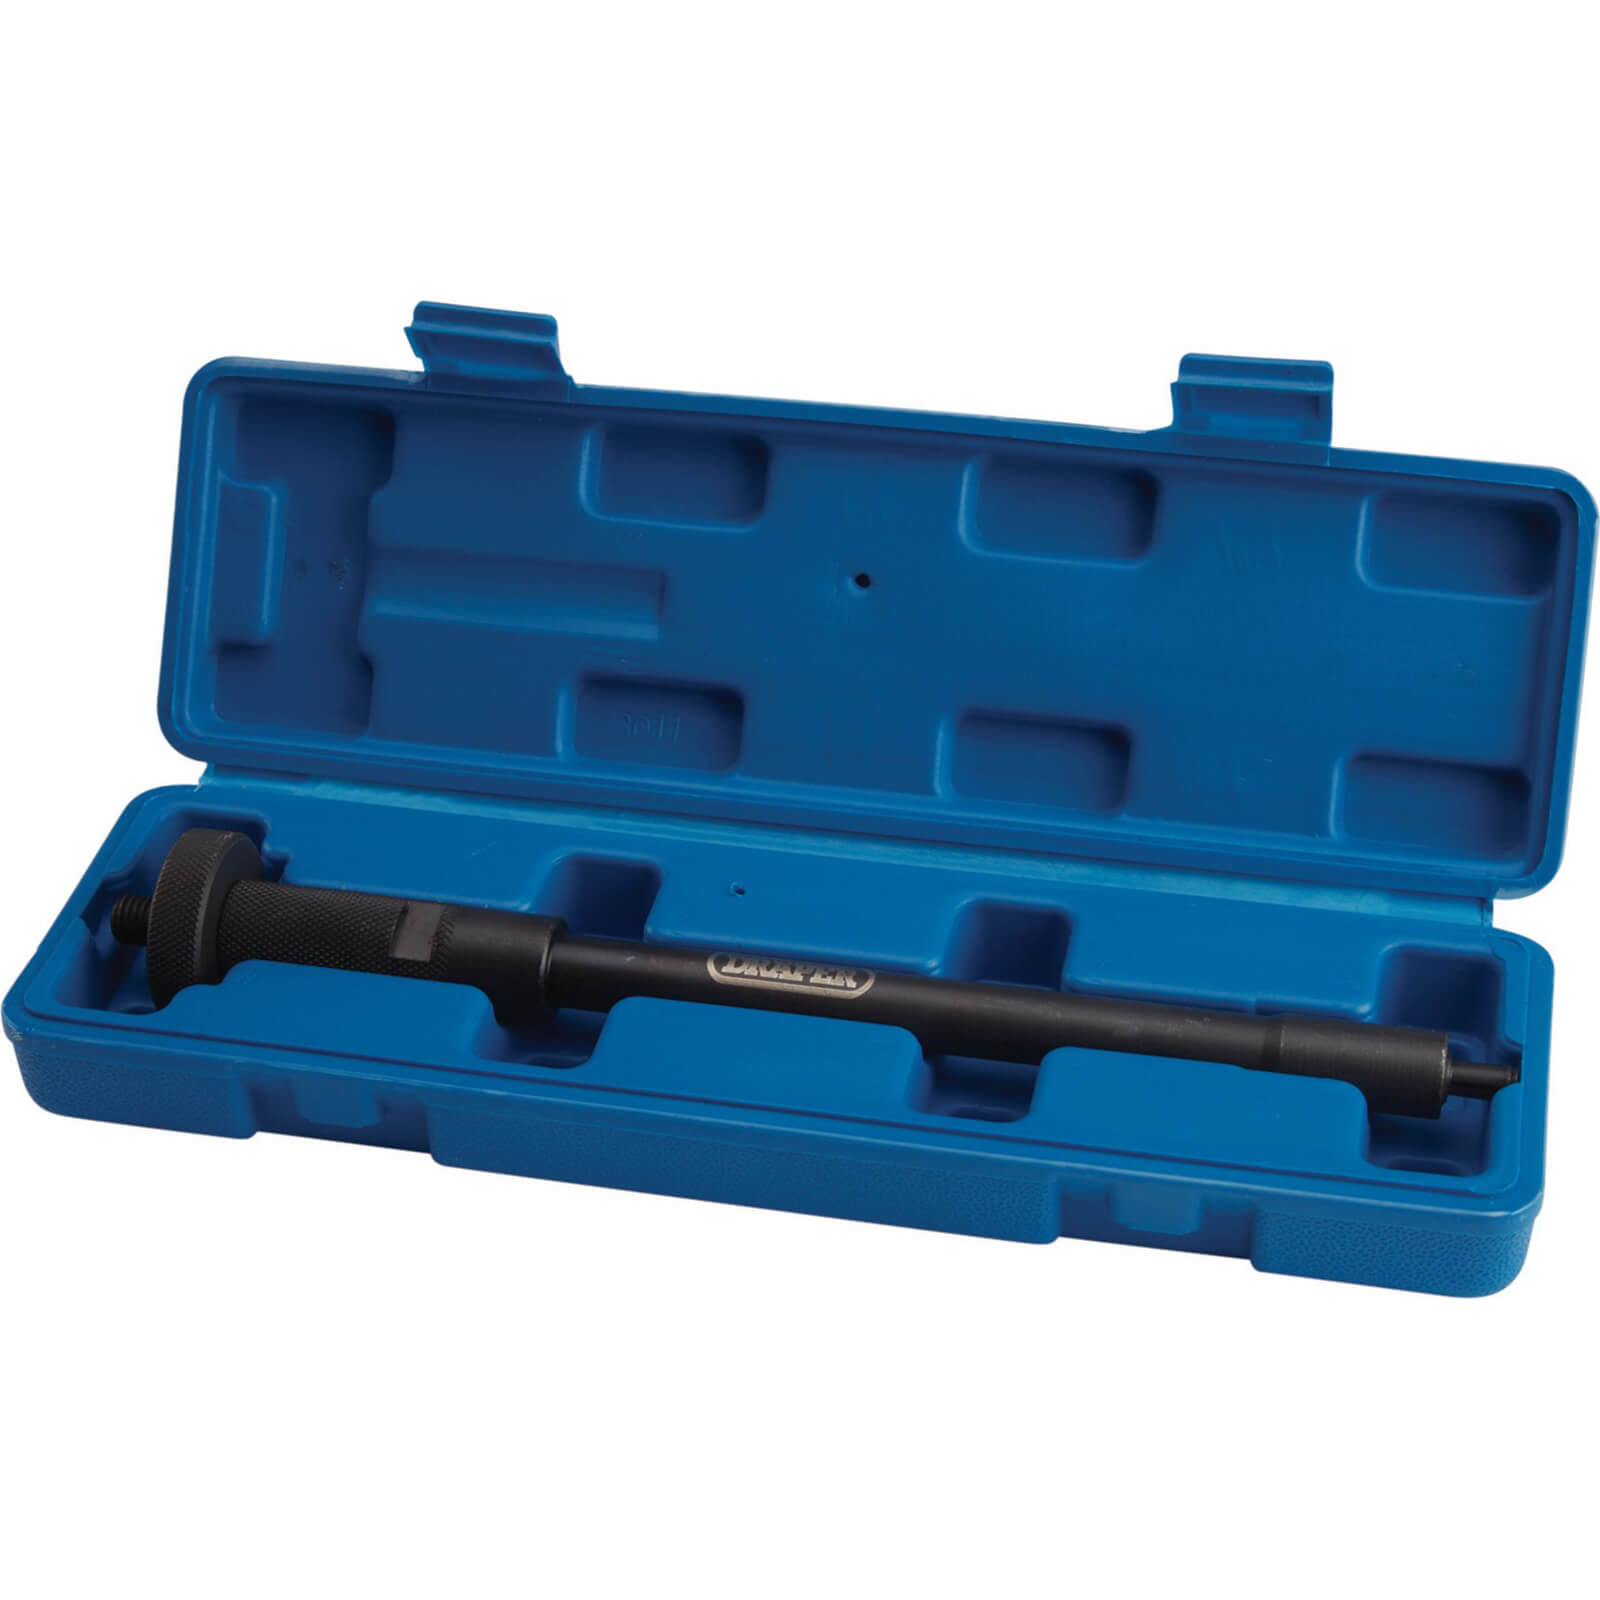 Image of Draper Injector Seal Removal Tool